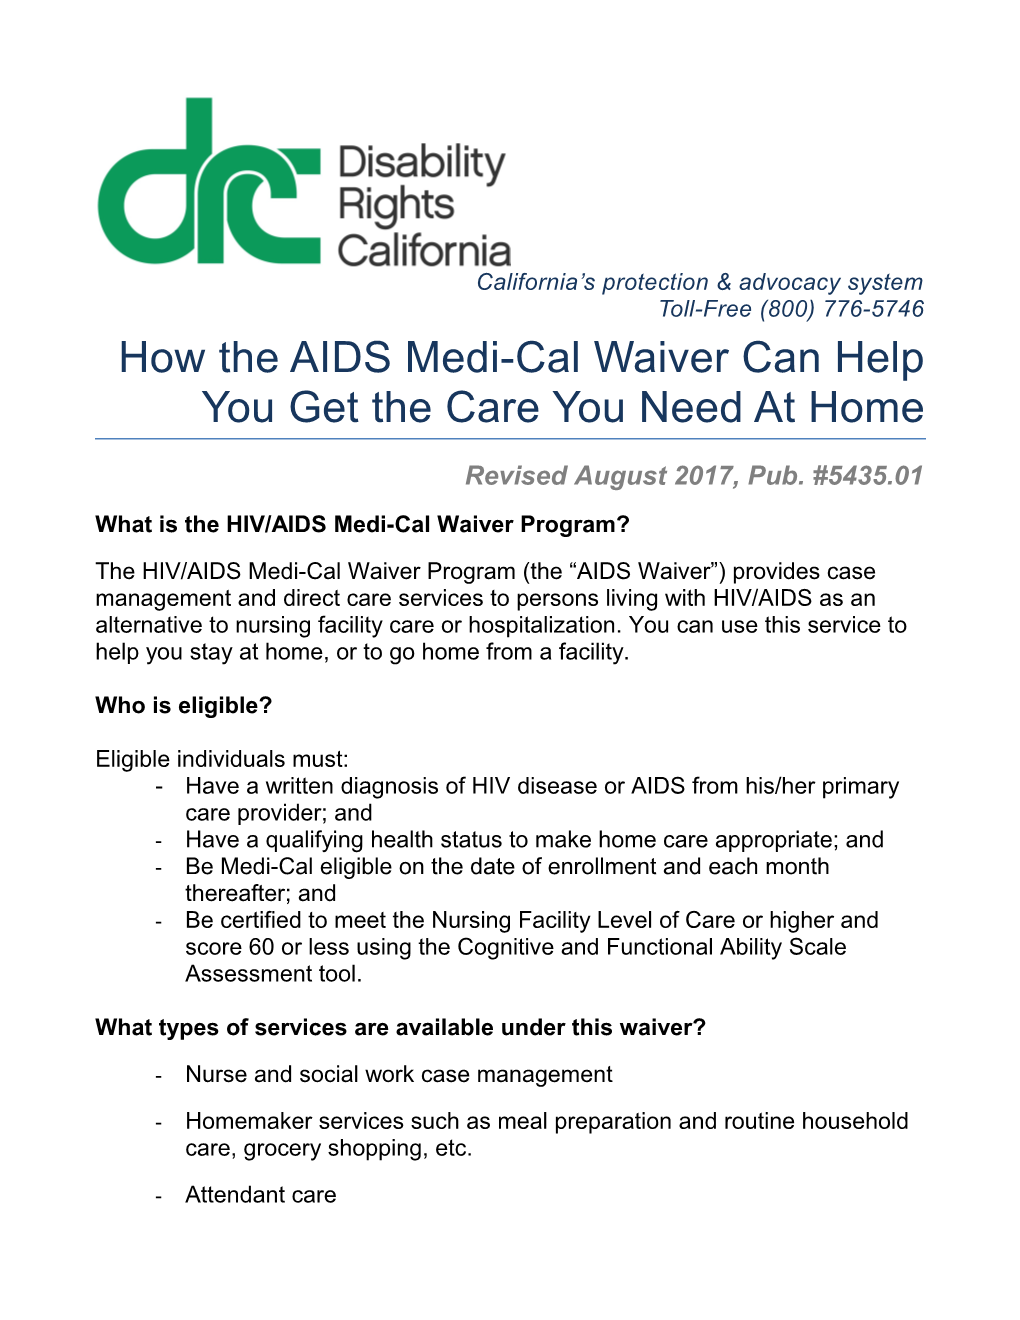 How the AIDS Medi-Cal Waiver